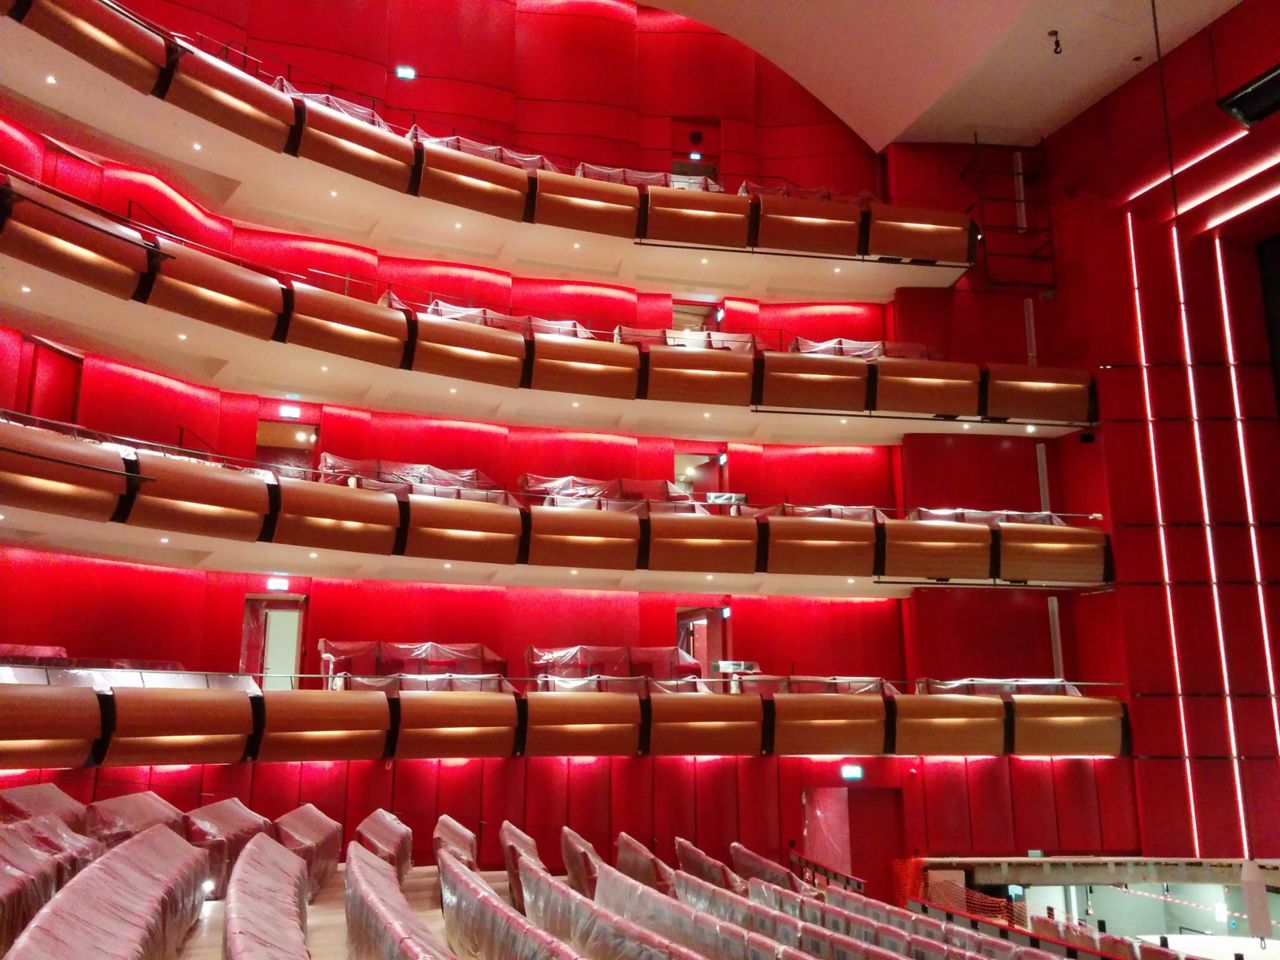 The Greek National Opera at the Stavros Niarchos Foundation Cultural Center